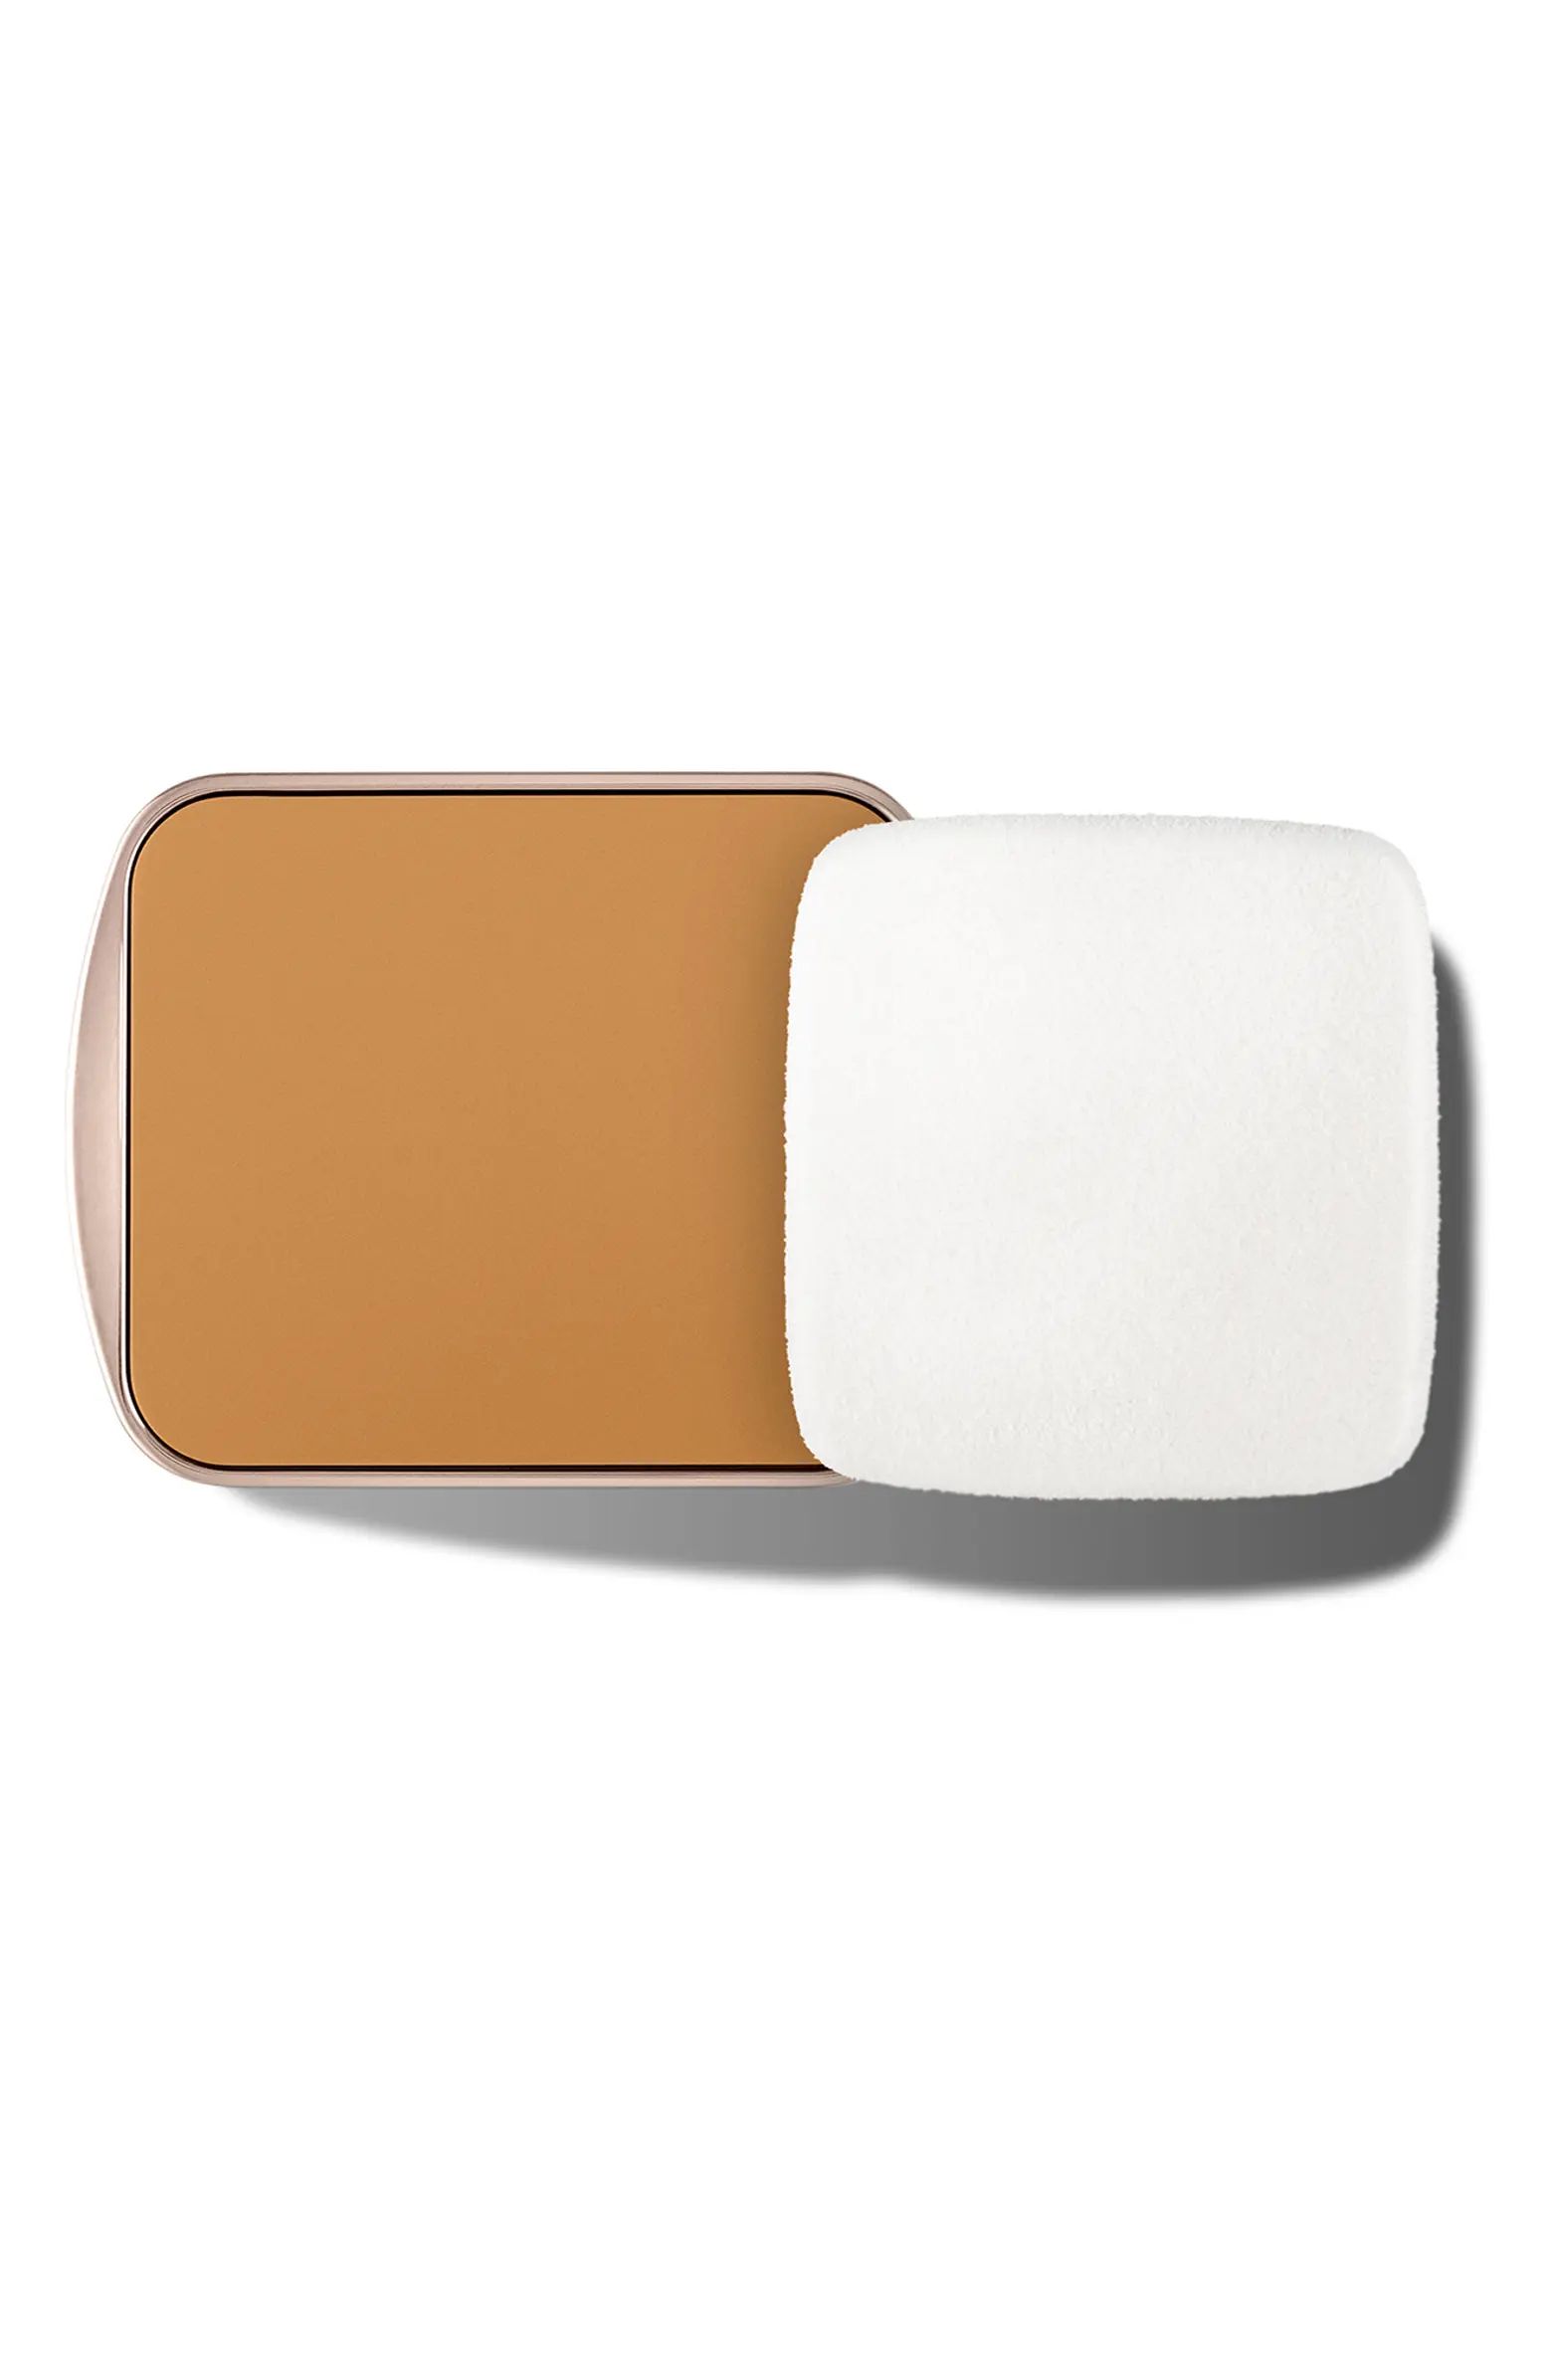 The Soft Moisture Powder Foundation Compact SPF 30 | Nordstrom